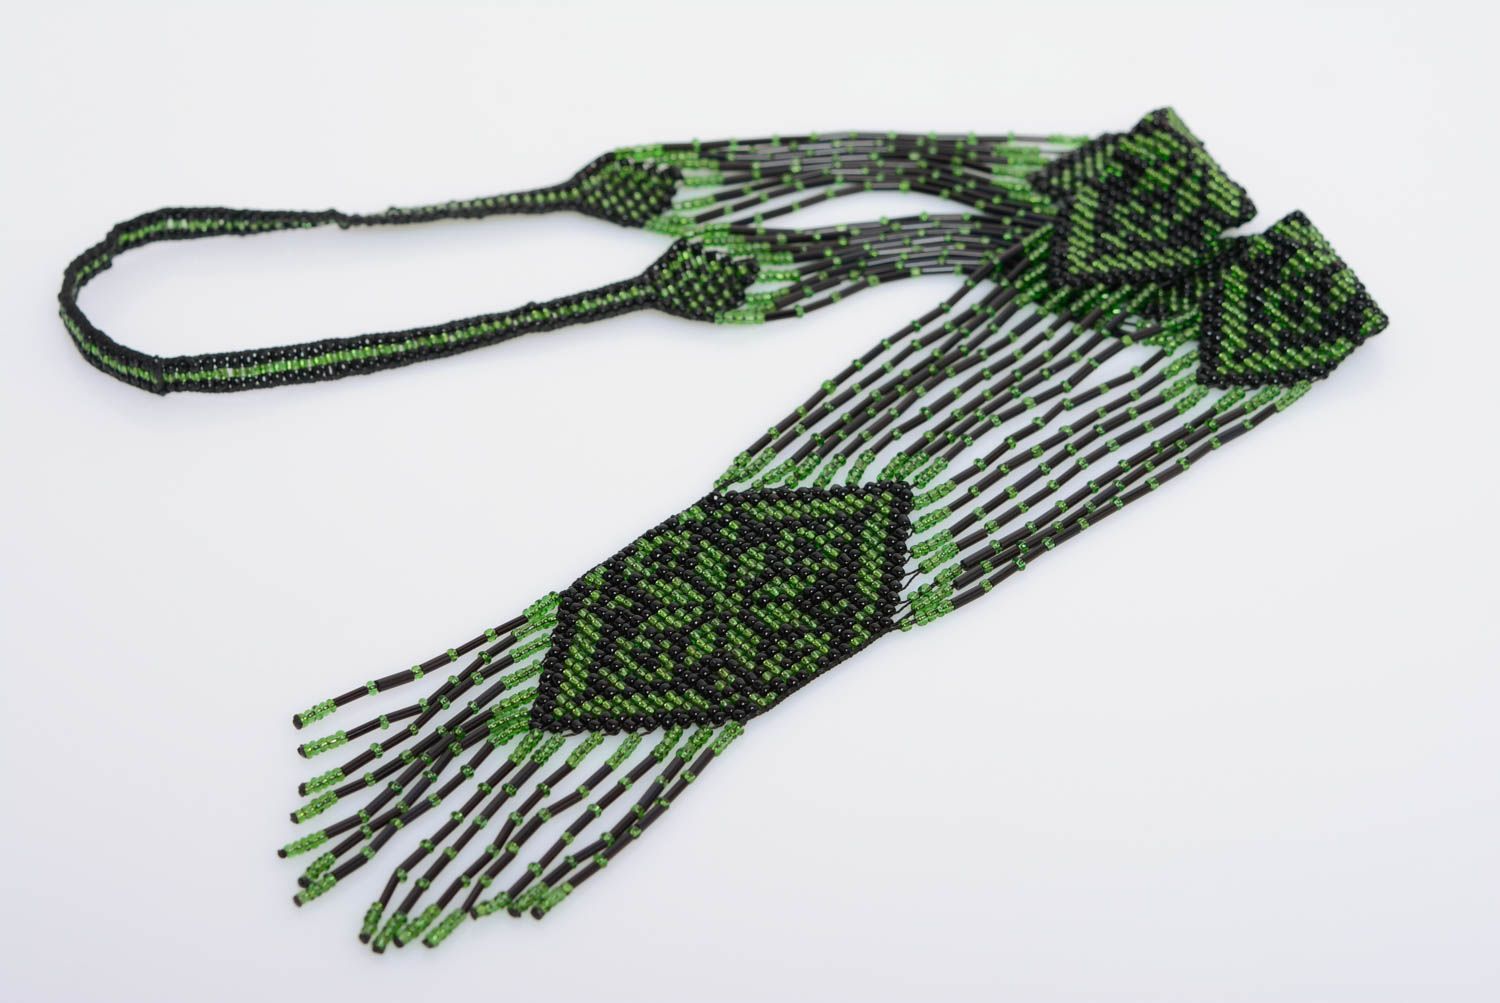 Beaded gerdan necklace in green and black colors long unusual handmade jewelry photo 1